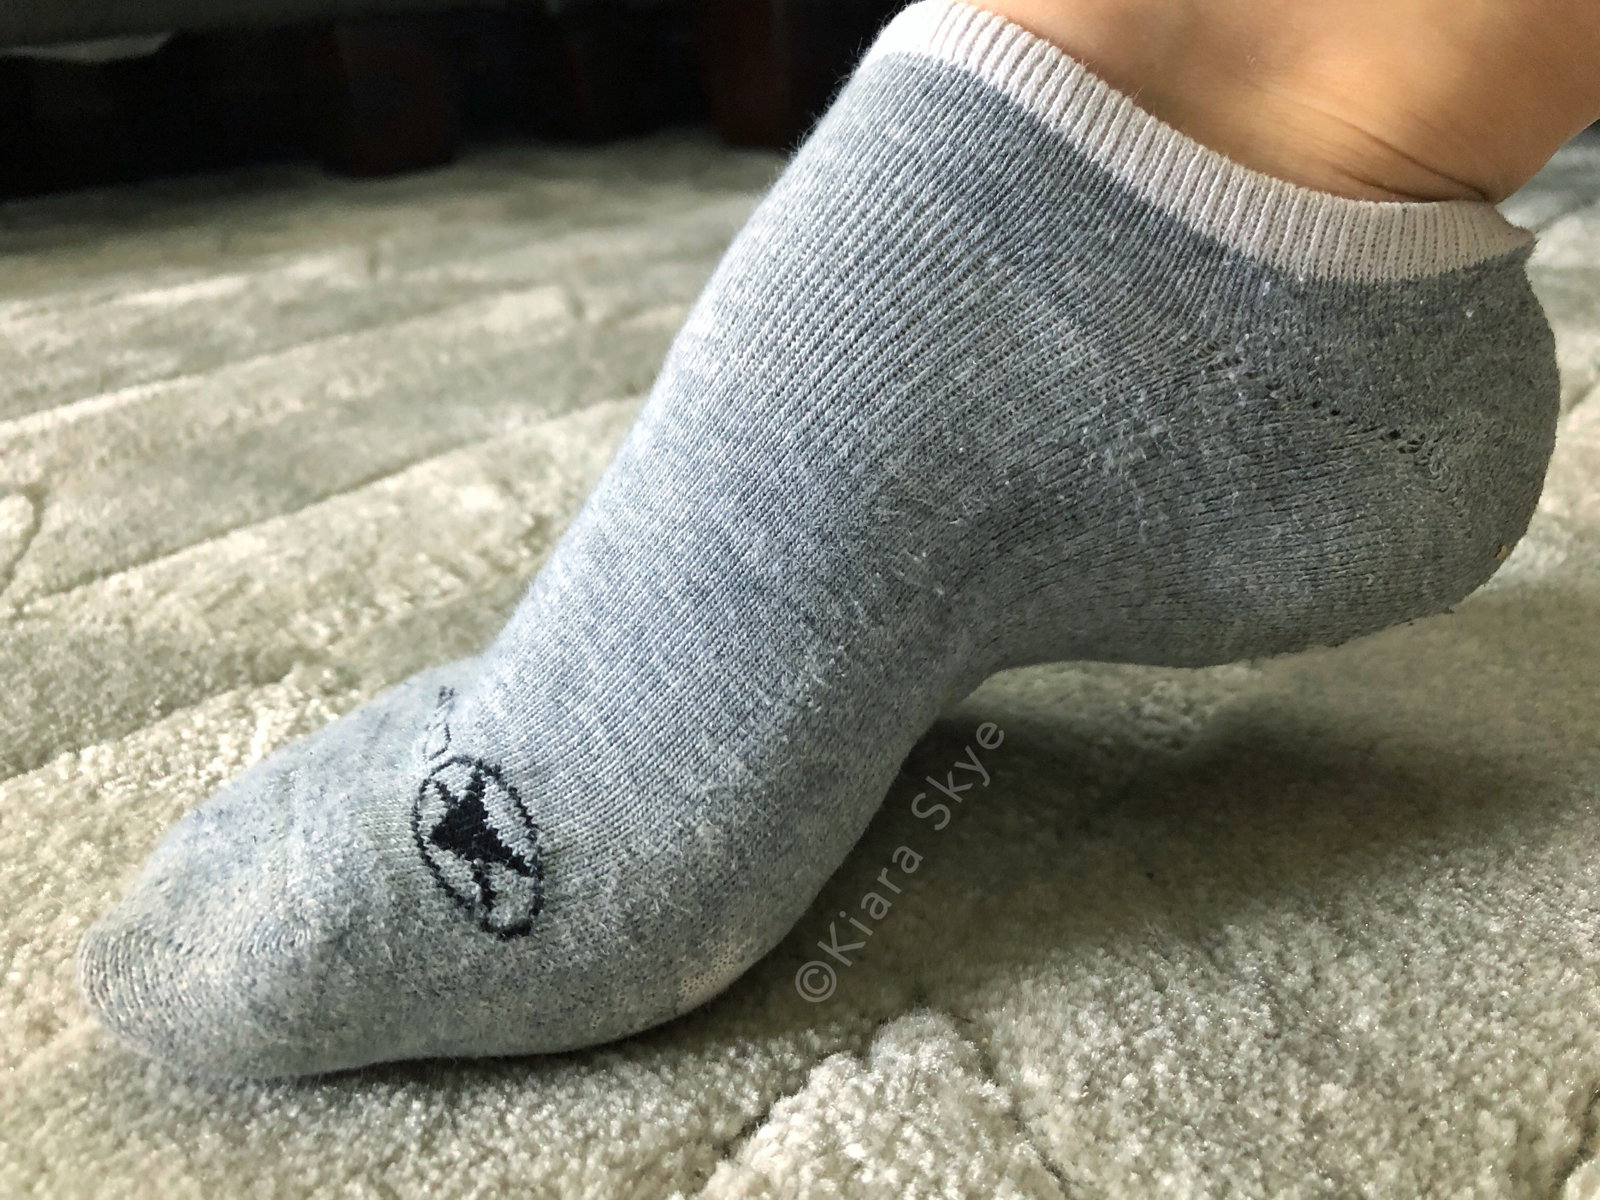 Watch the Photo by Kiara Skye with the username @KiaraSkye, who is a star user, posted on March 20, 2019. The post is about the topic Foot Fetish. and the text says 'Dirty #smellysocks up for auction. Place some bids #footfreak! 👣

🔗CLICK HERE: http://www.ebanned.net/cgi-bin/auction/auction.cgi?category=wclothing23&item=1553562317 

#socks #wornsocks #wornitems #feet #footfetish'